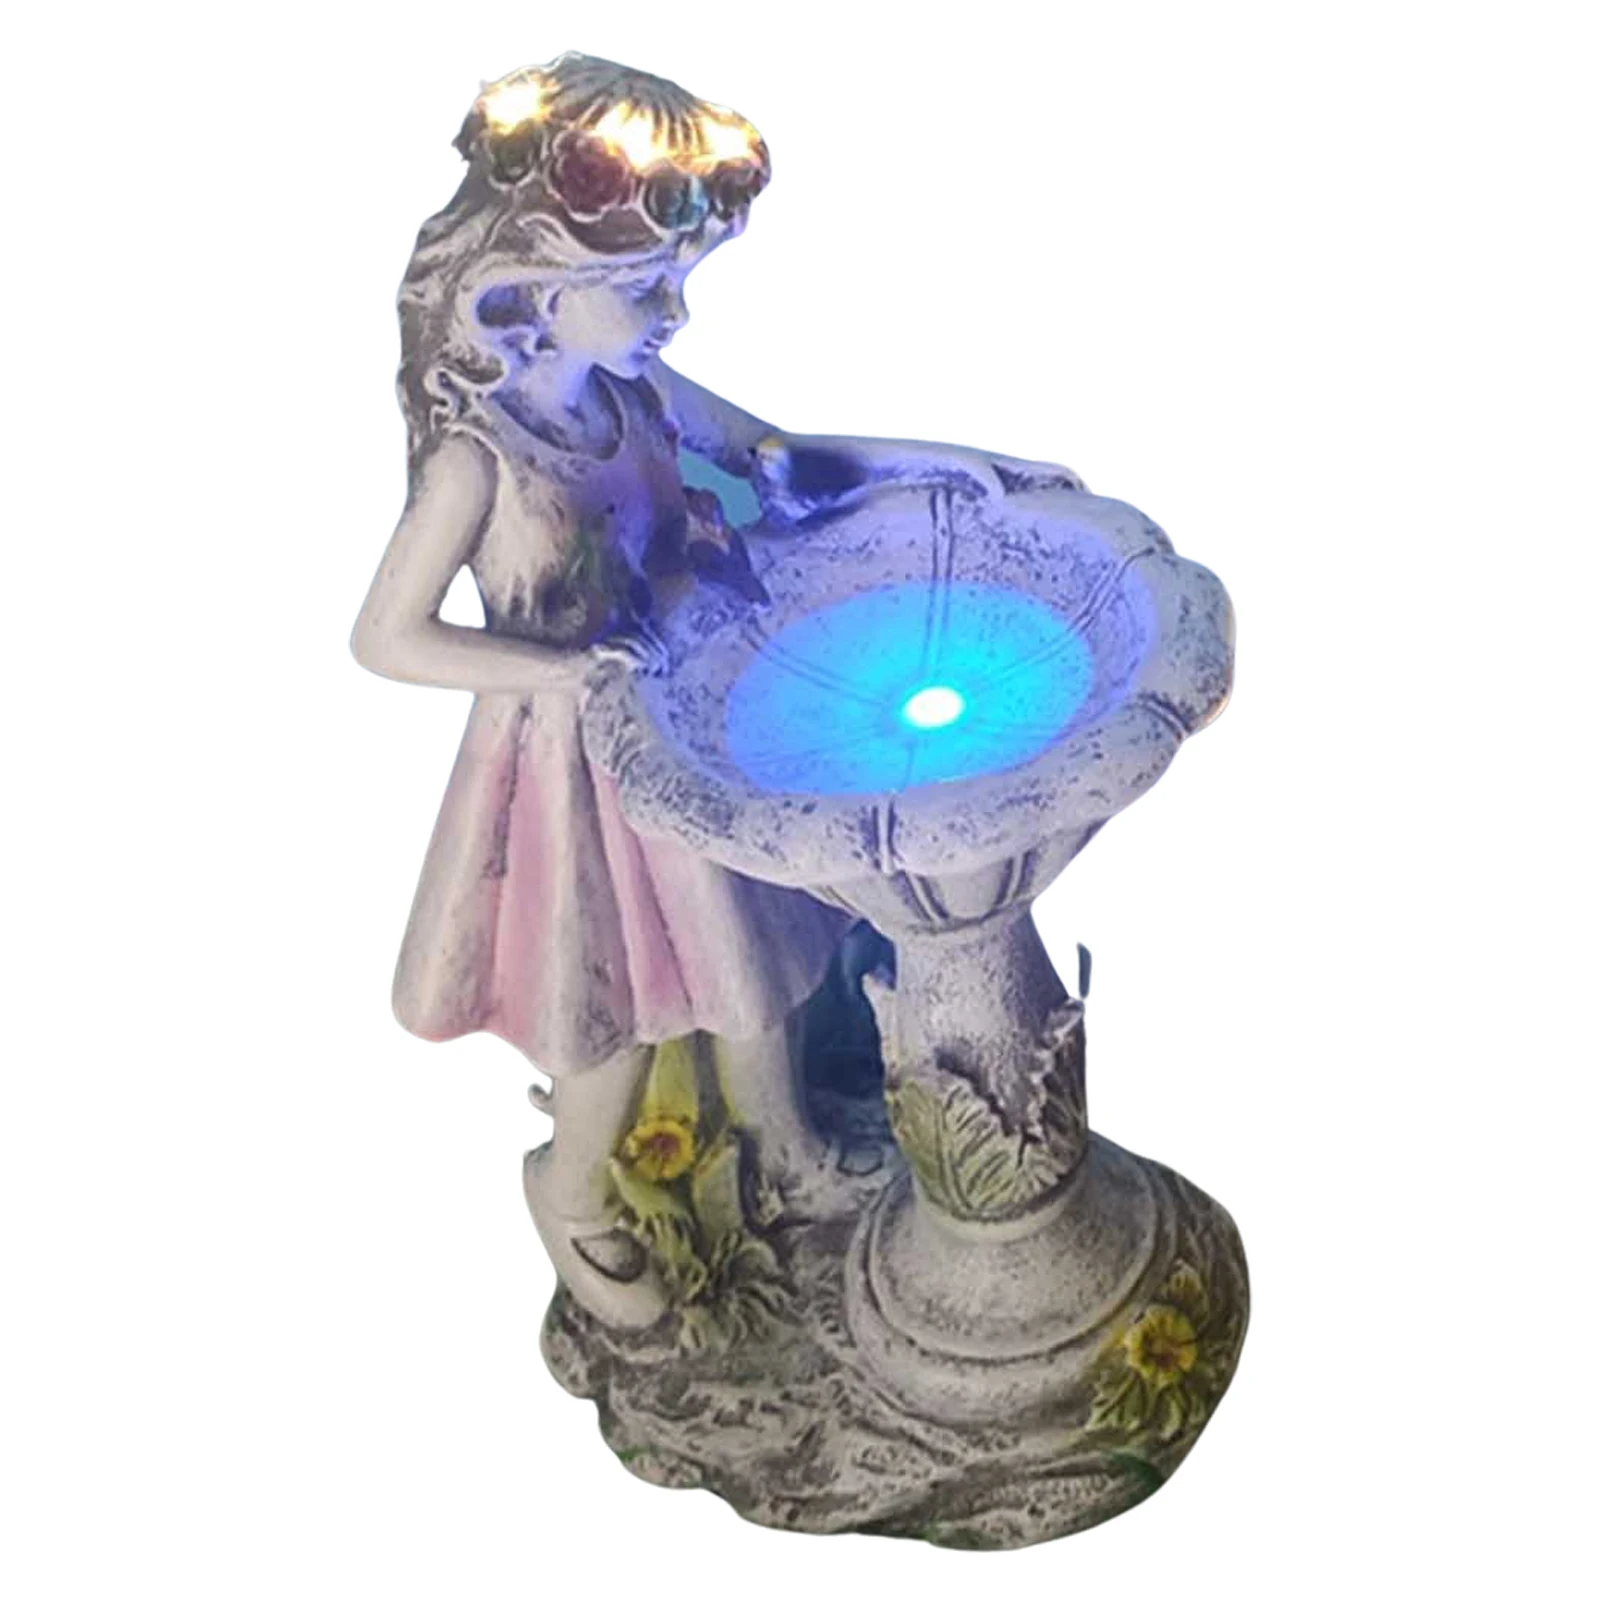 Fairy Garden Statue and Sculpture with Solar Powered Lights Resin Outdoor Angel Garden Figurines for Lawn Patio Yard Decorations